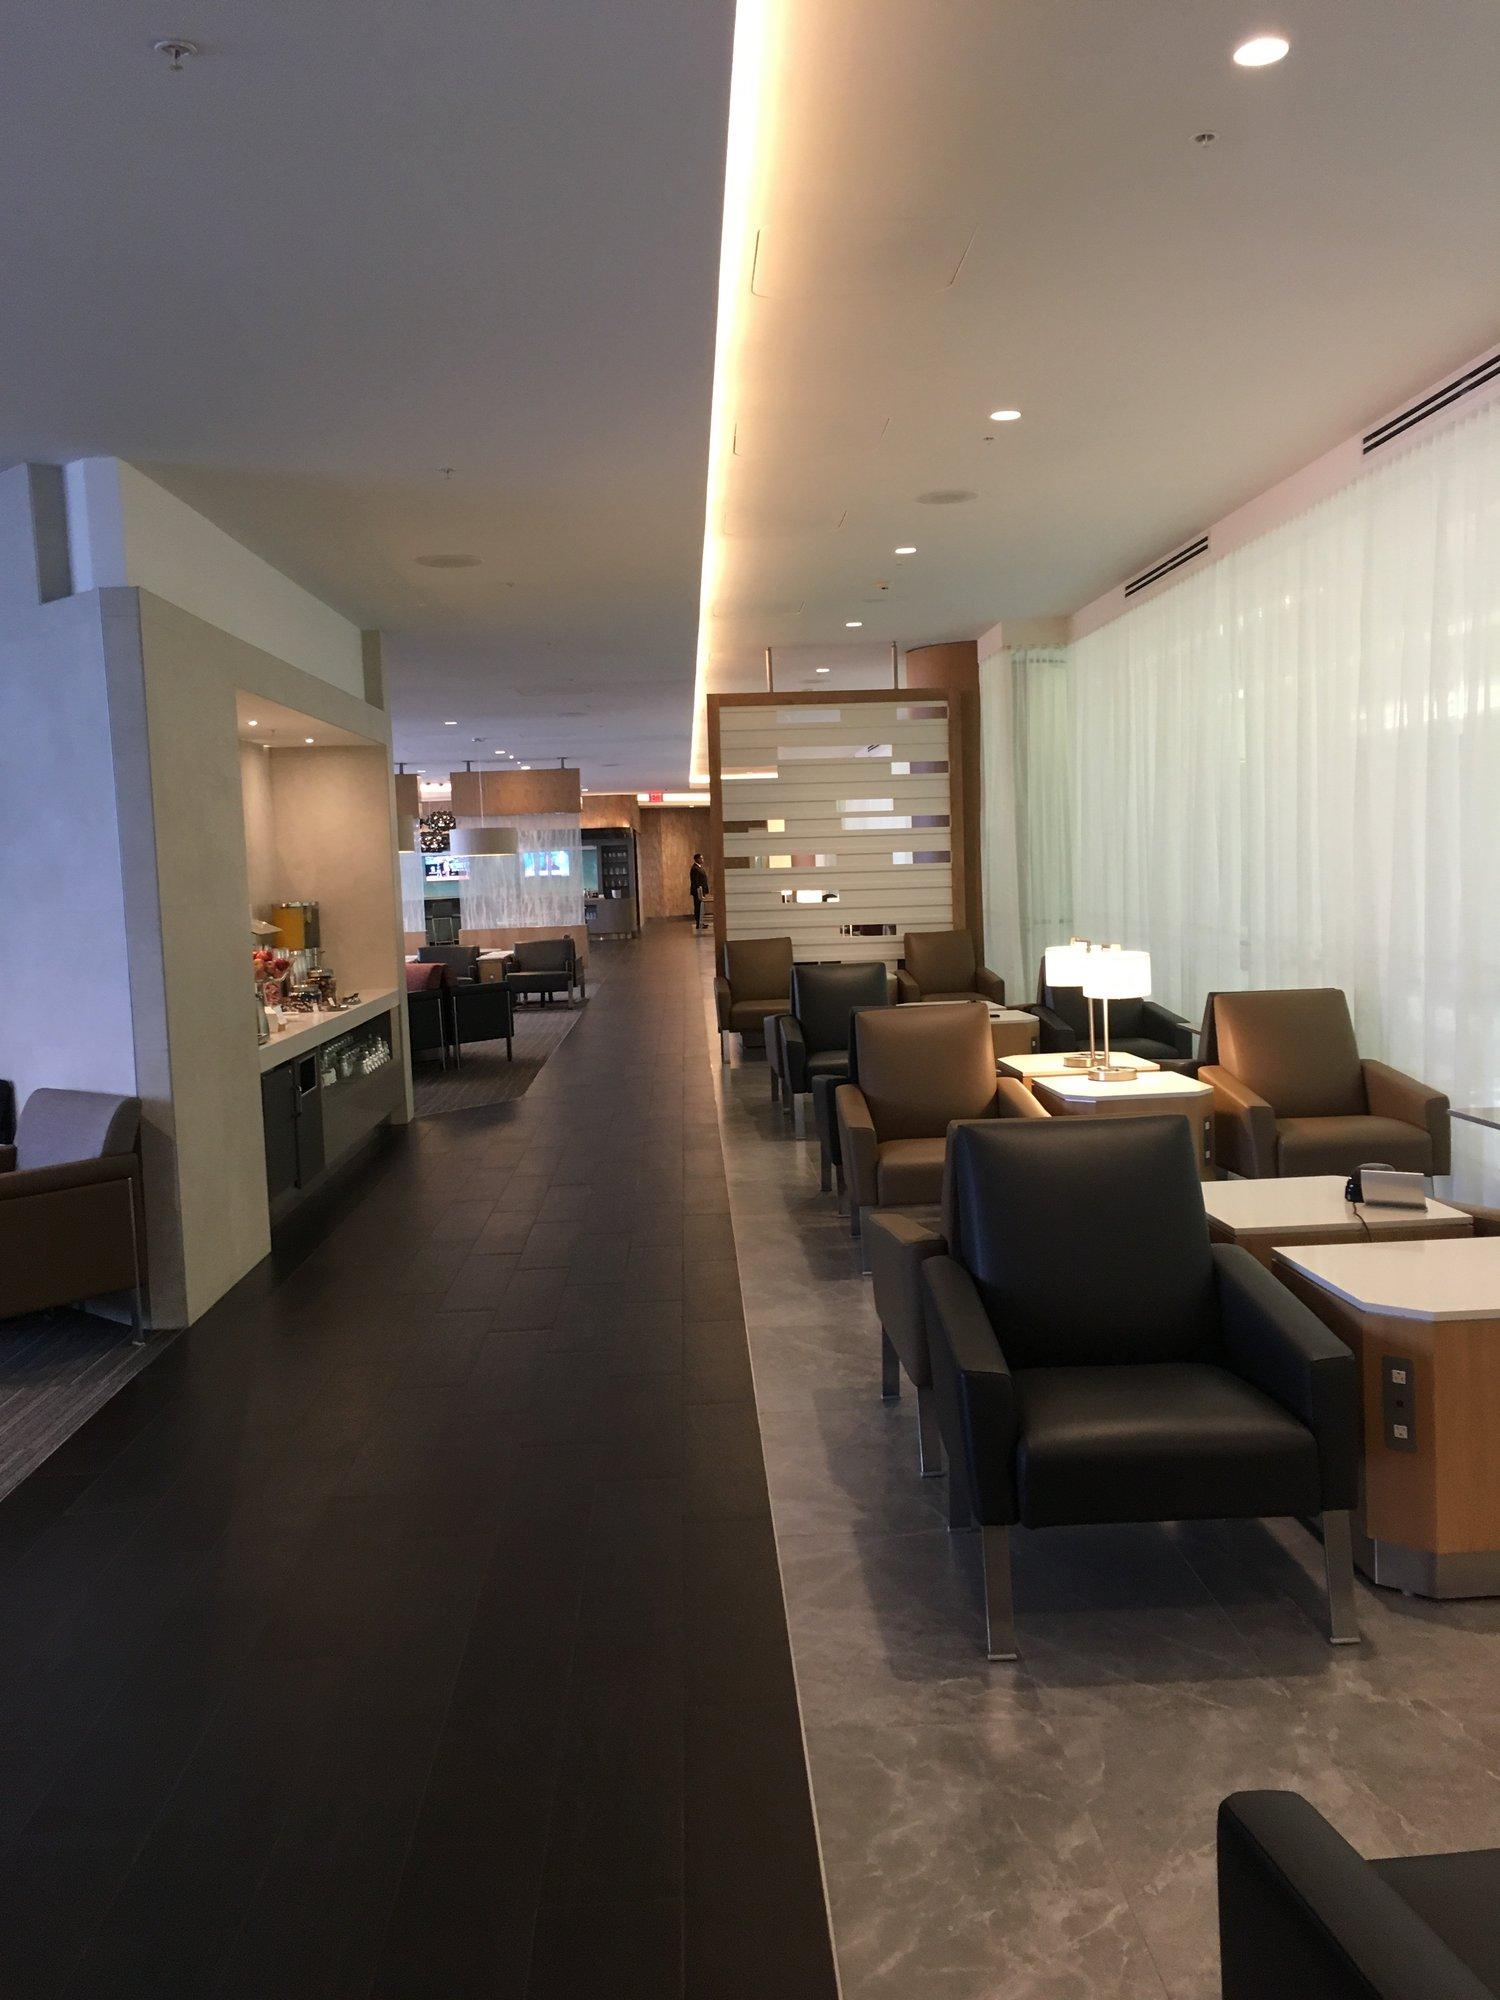 American Airlines Flagship Lounge image 38 of 65